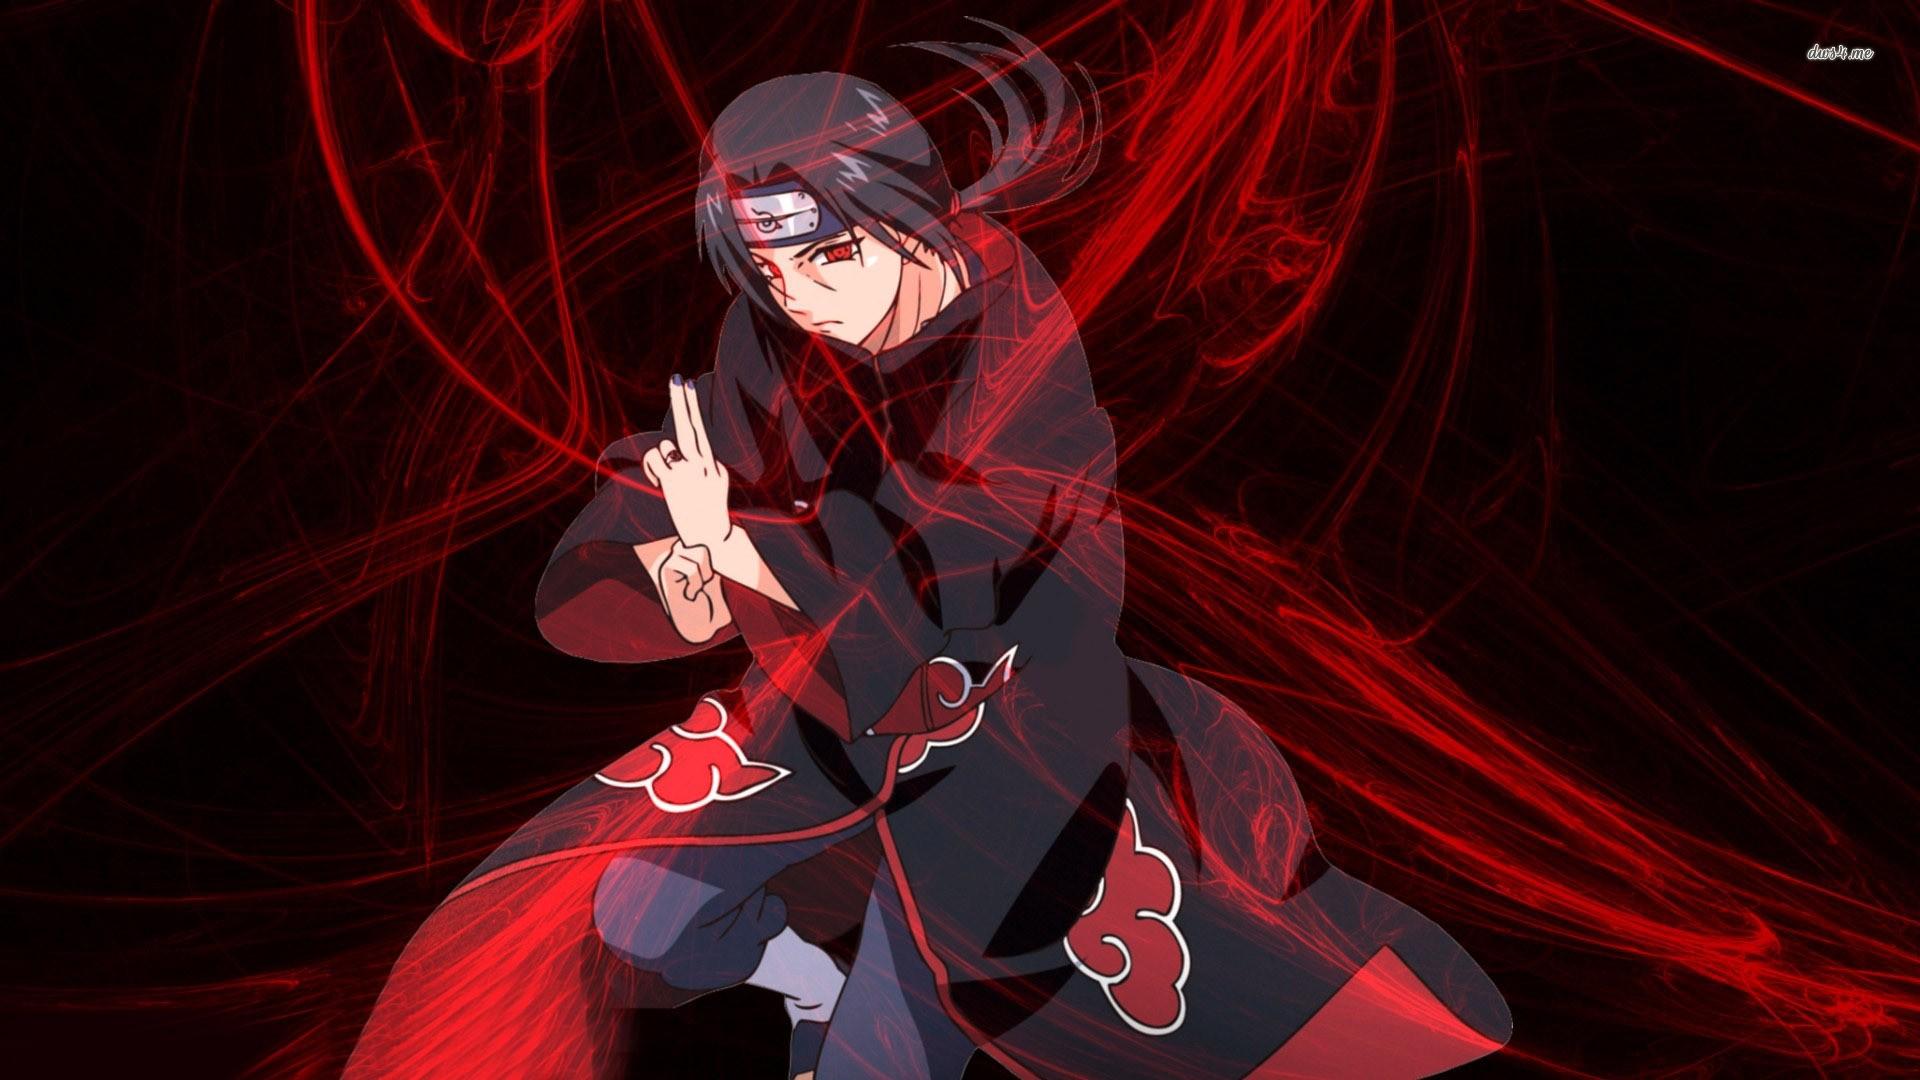 1920 x 1080 · jpeg - Itachi Uchiha wallpaper 1 Download free awesome backgrounds for ...